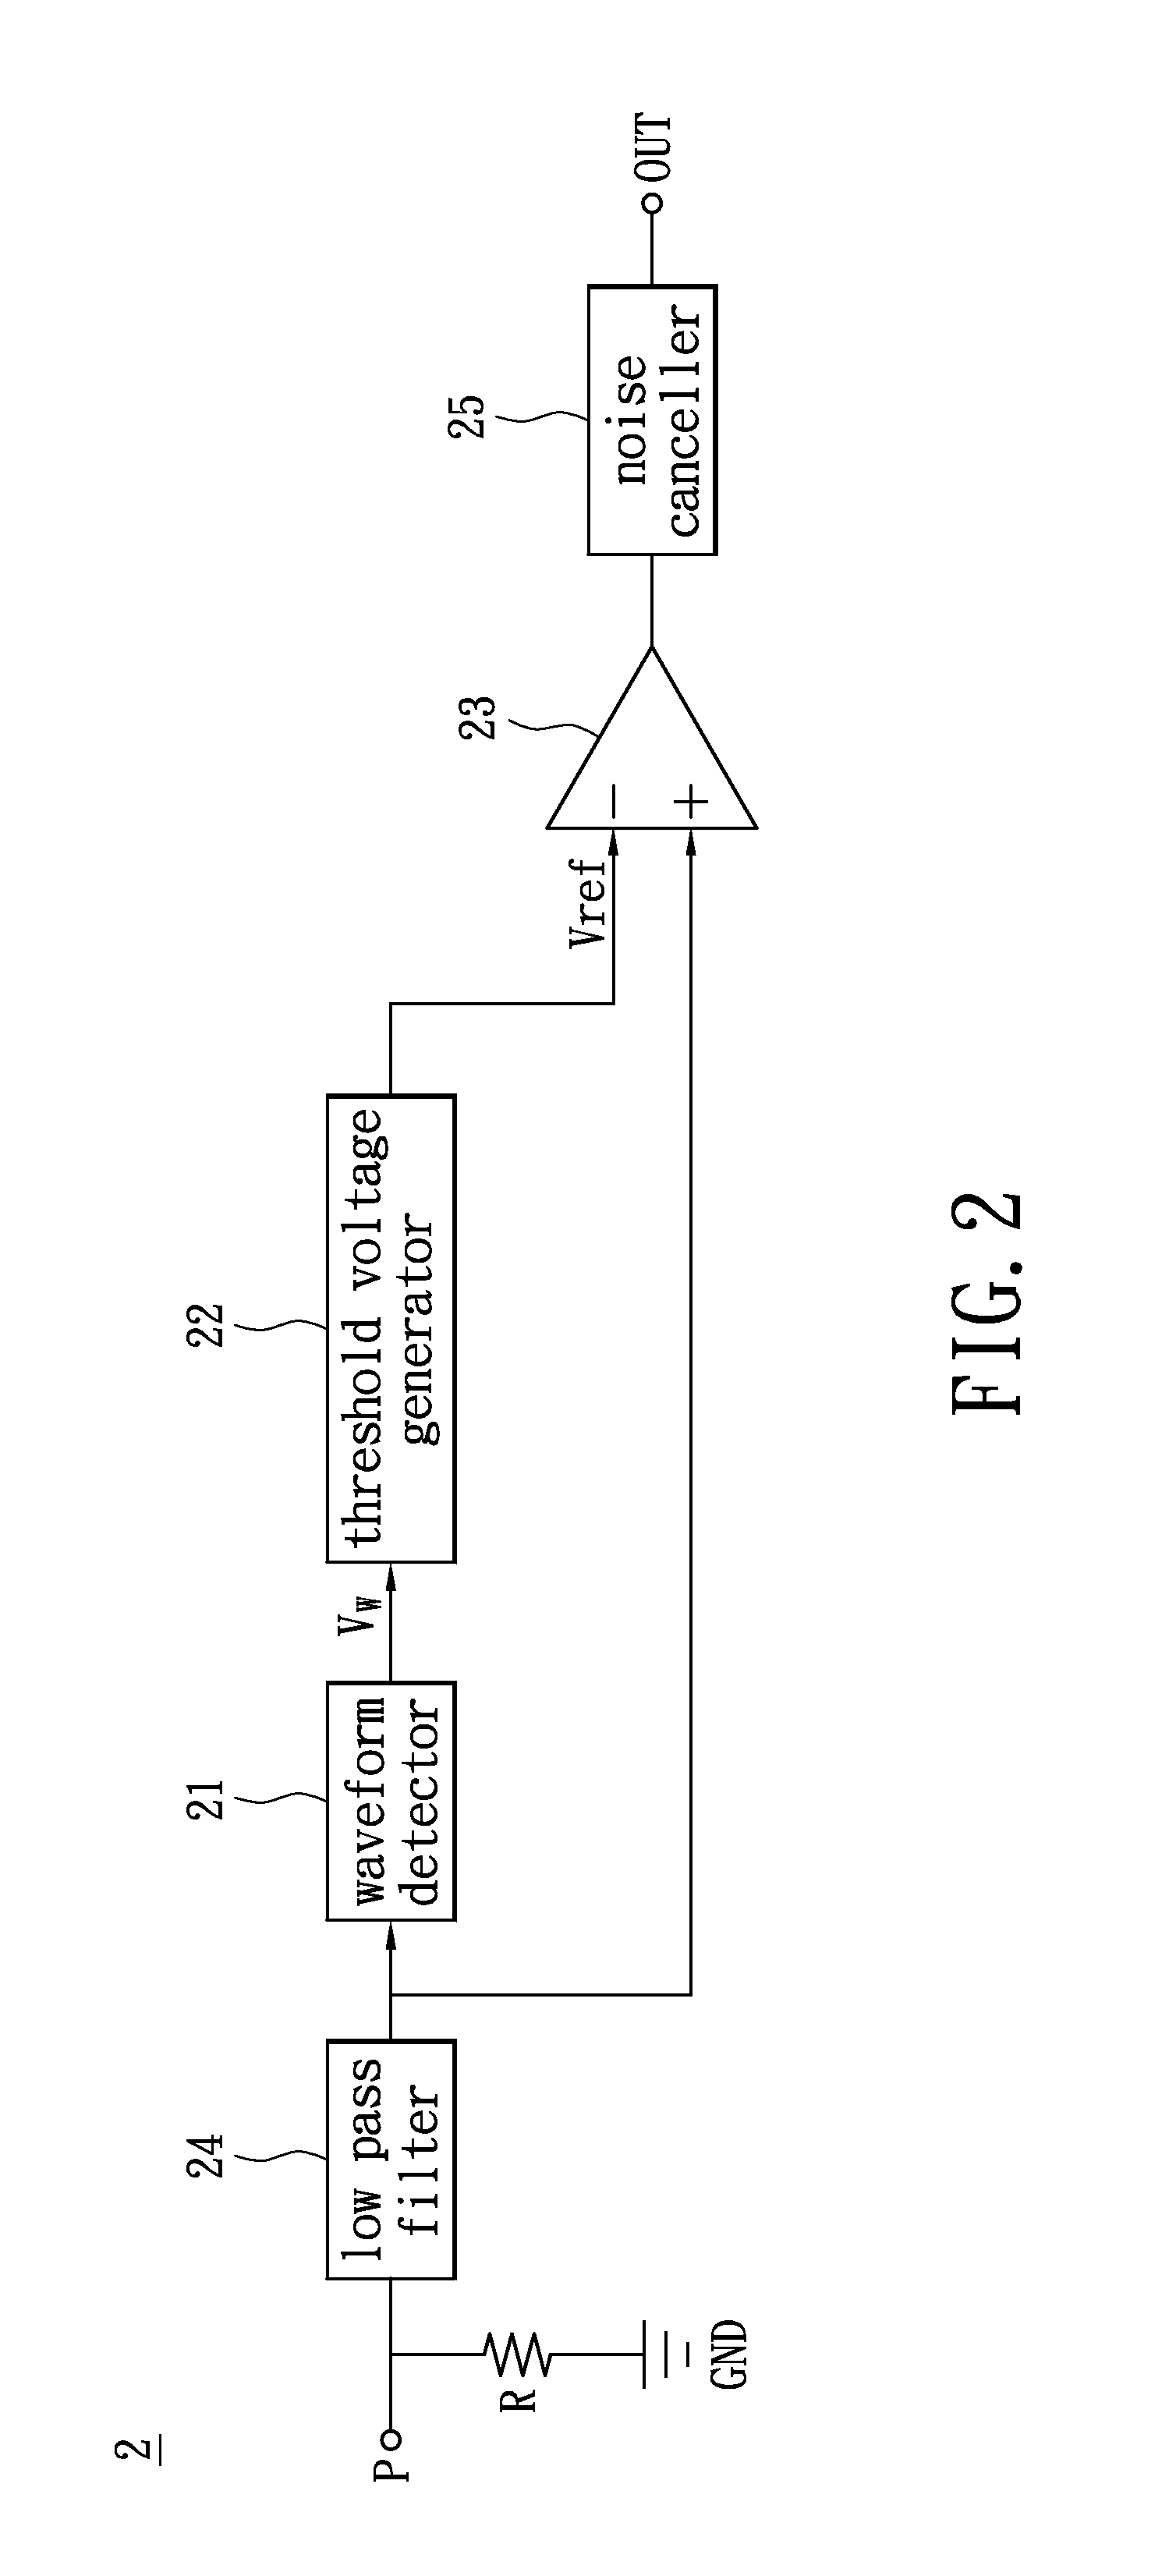 Phase detection apparatus for alternator and method thereof